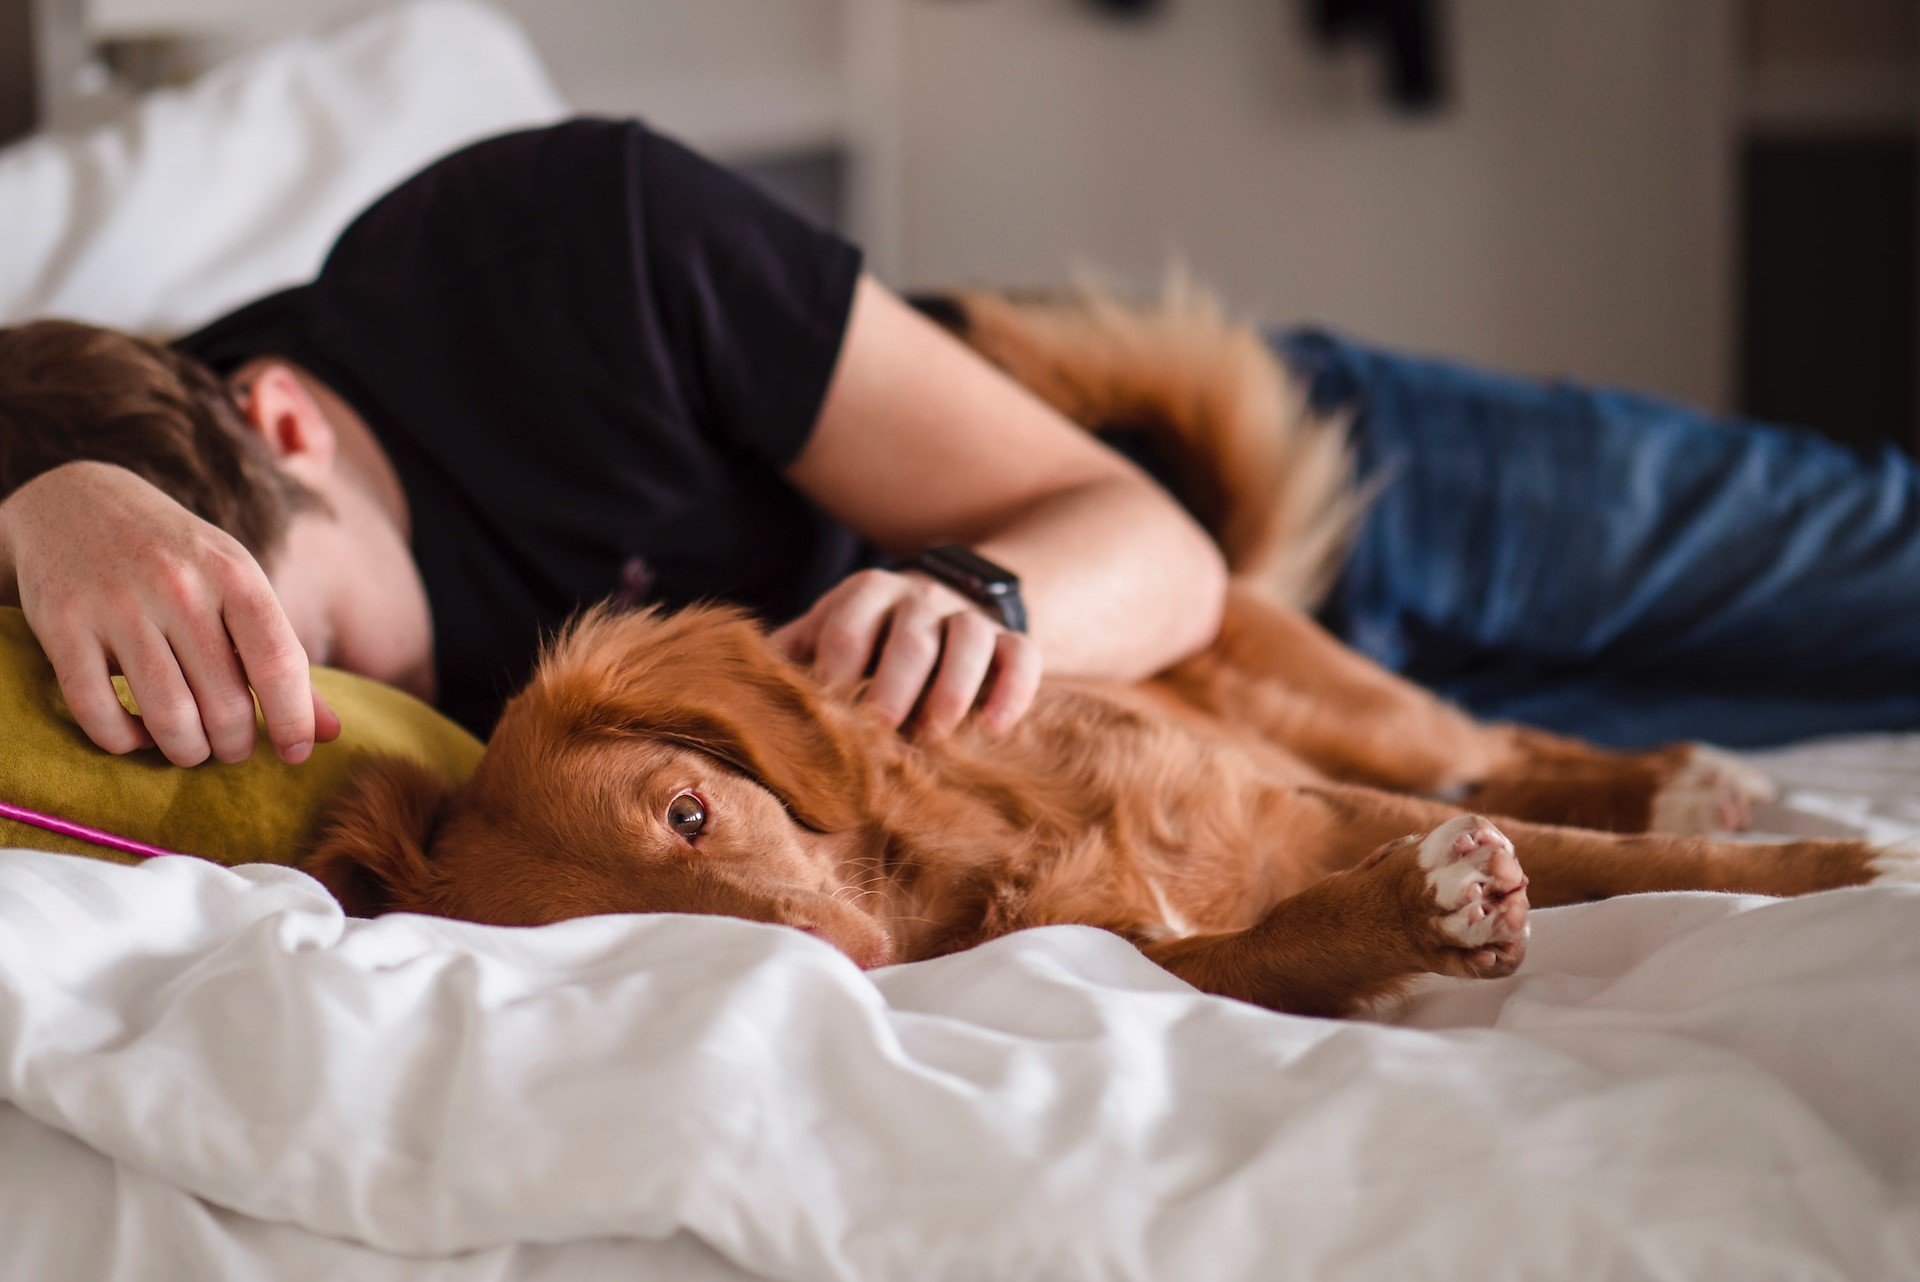 Why To Avoid Sharing Beds With Pets